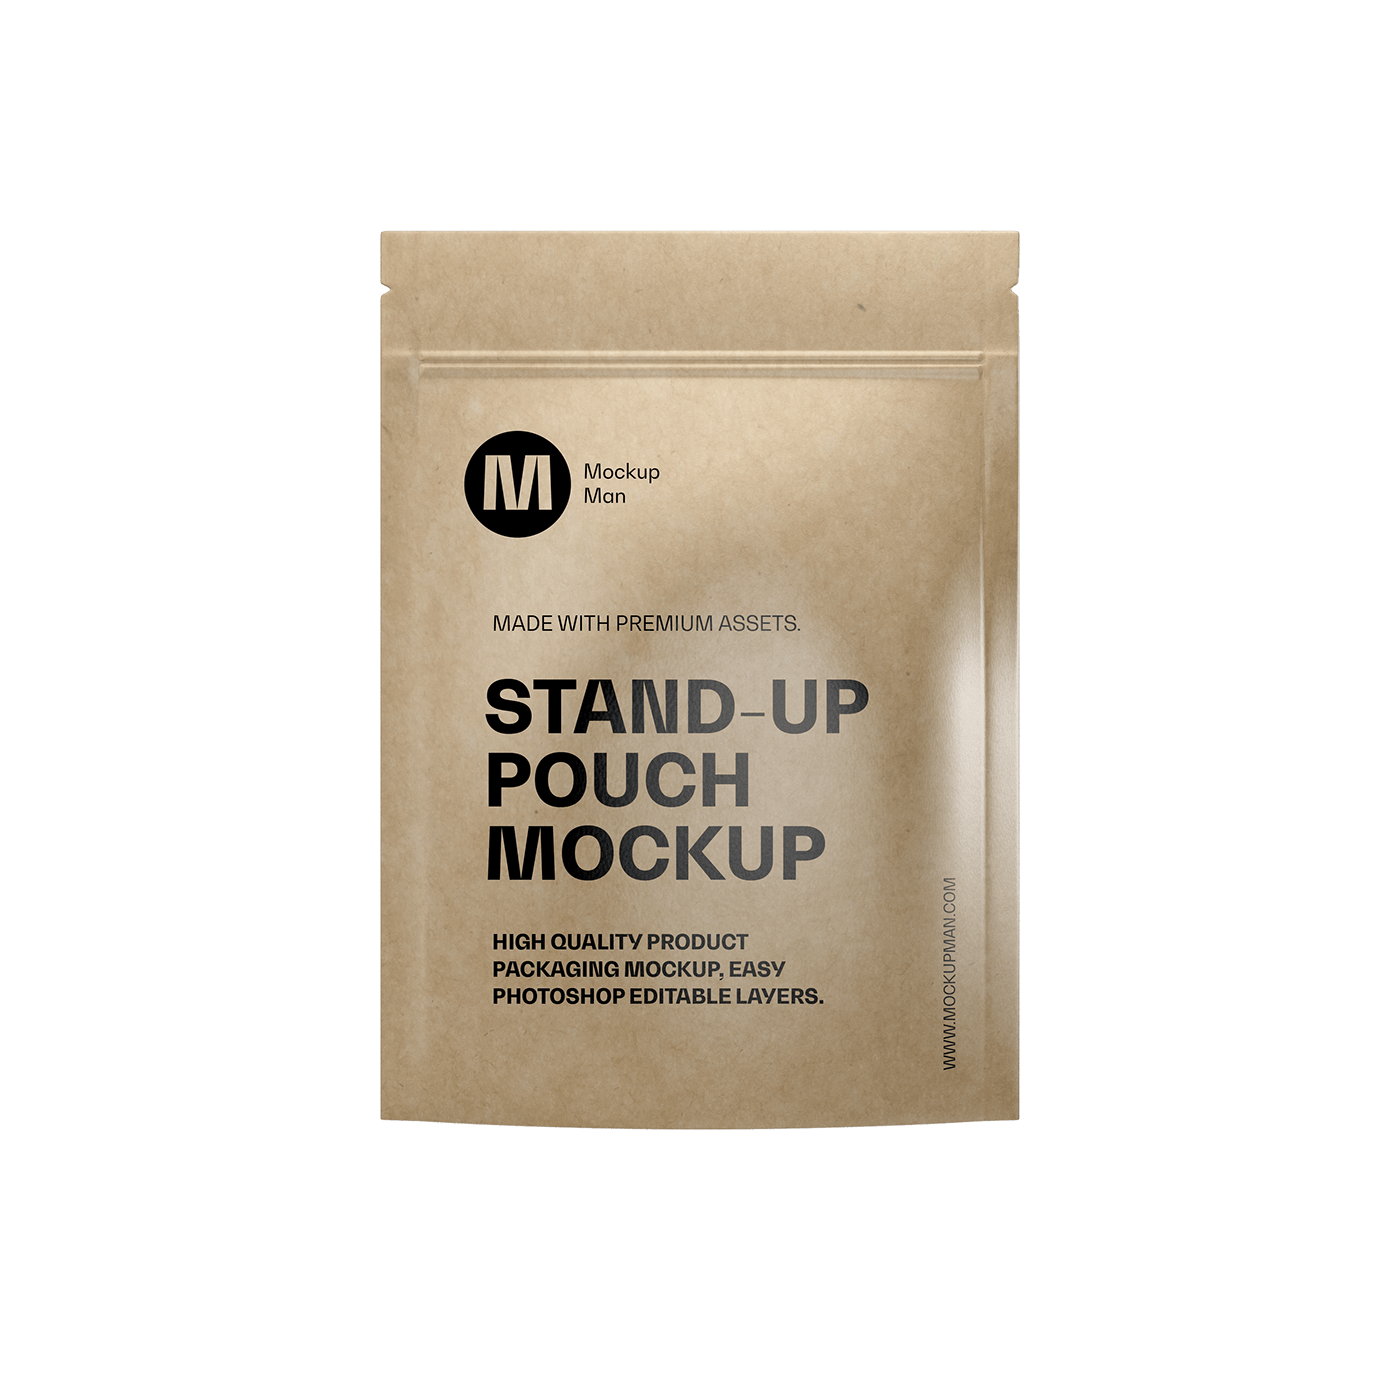 coffee pouch mockup free mockup  Free Mockups free pouch mockup mopckup Pouch Packaging premium mockup Stand-up Pouch Mockup